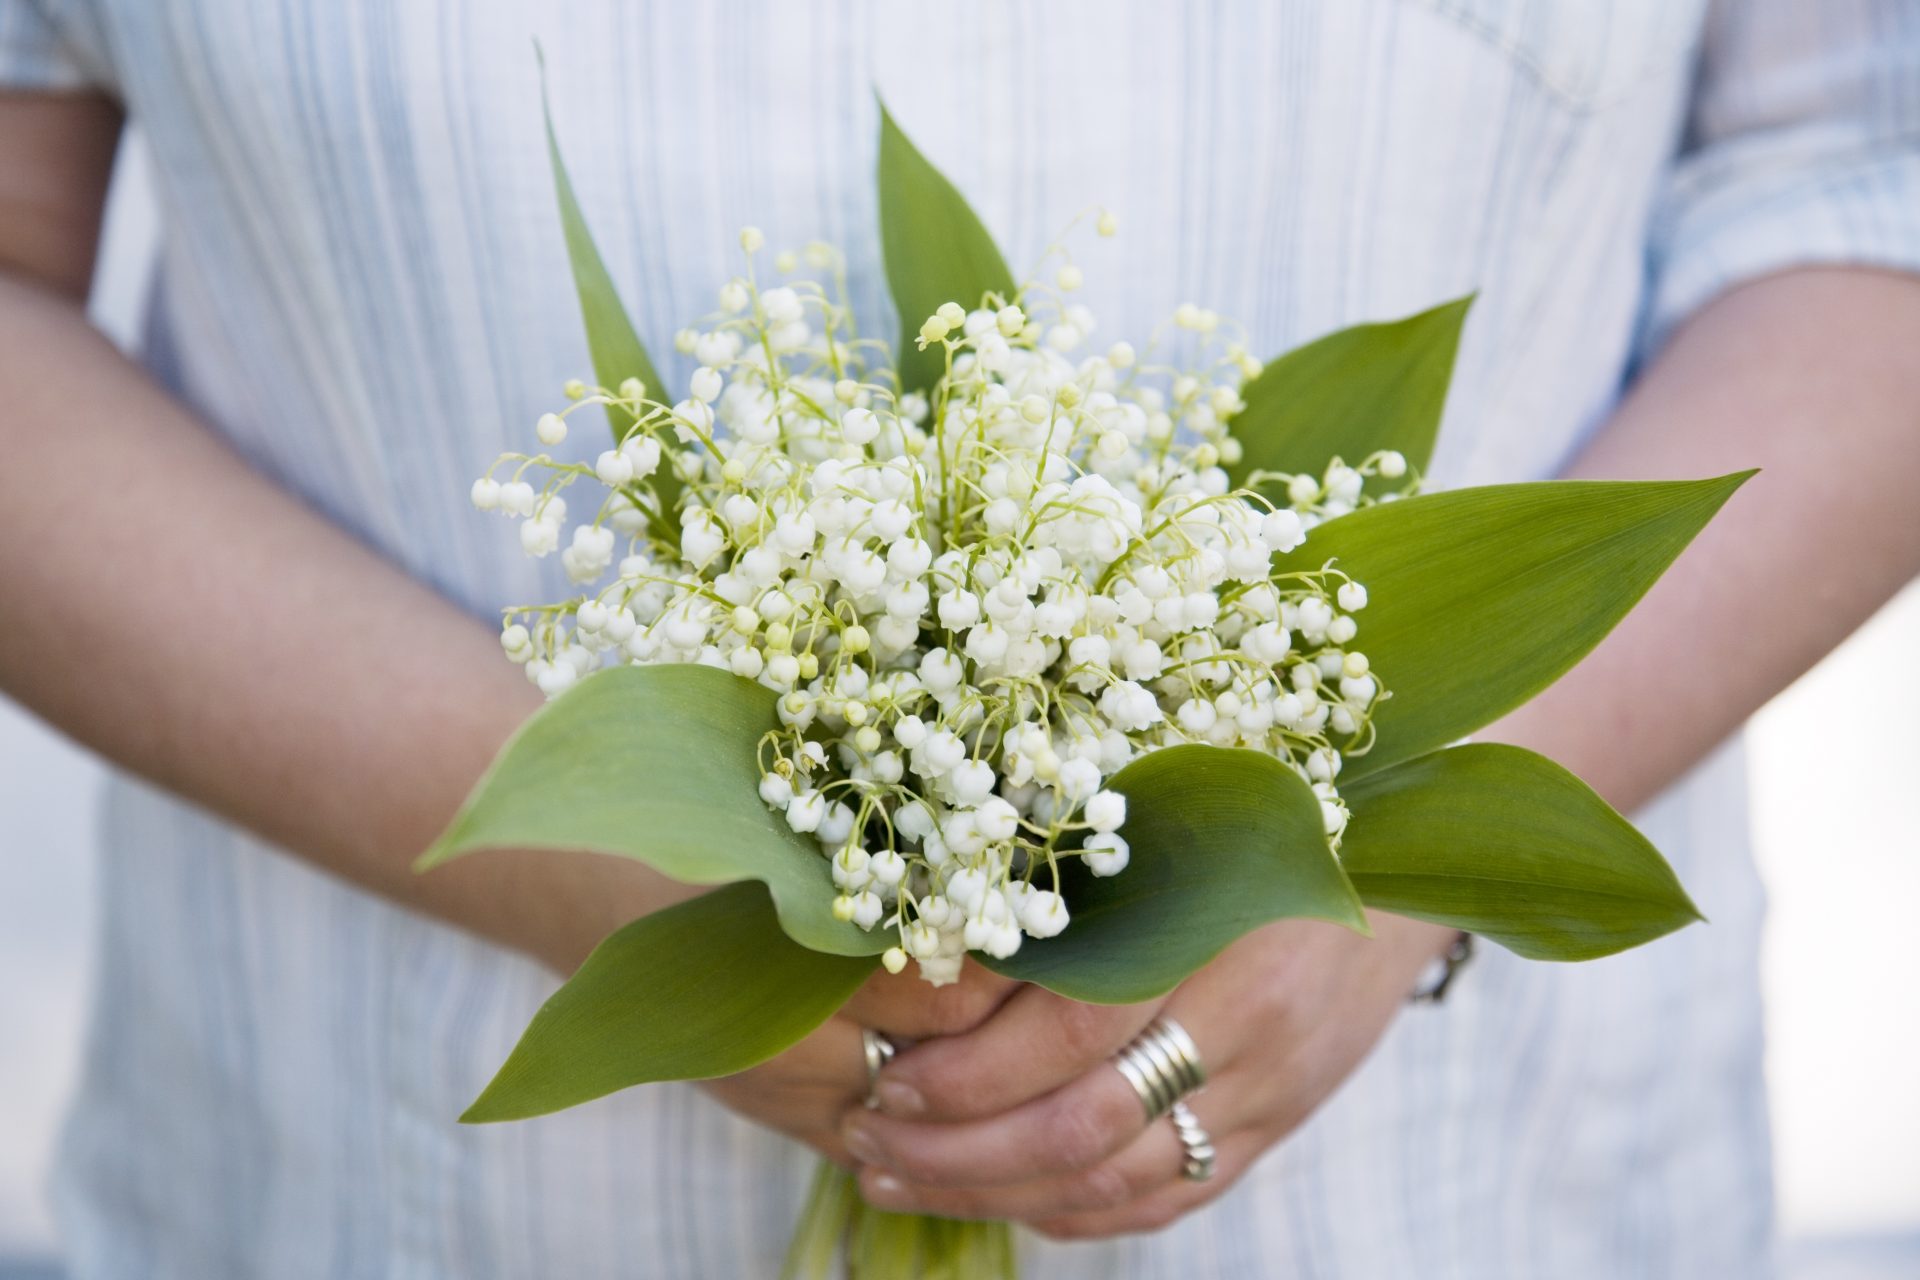 Finland: lily of the valley